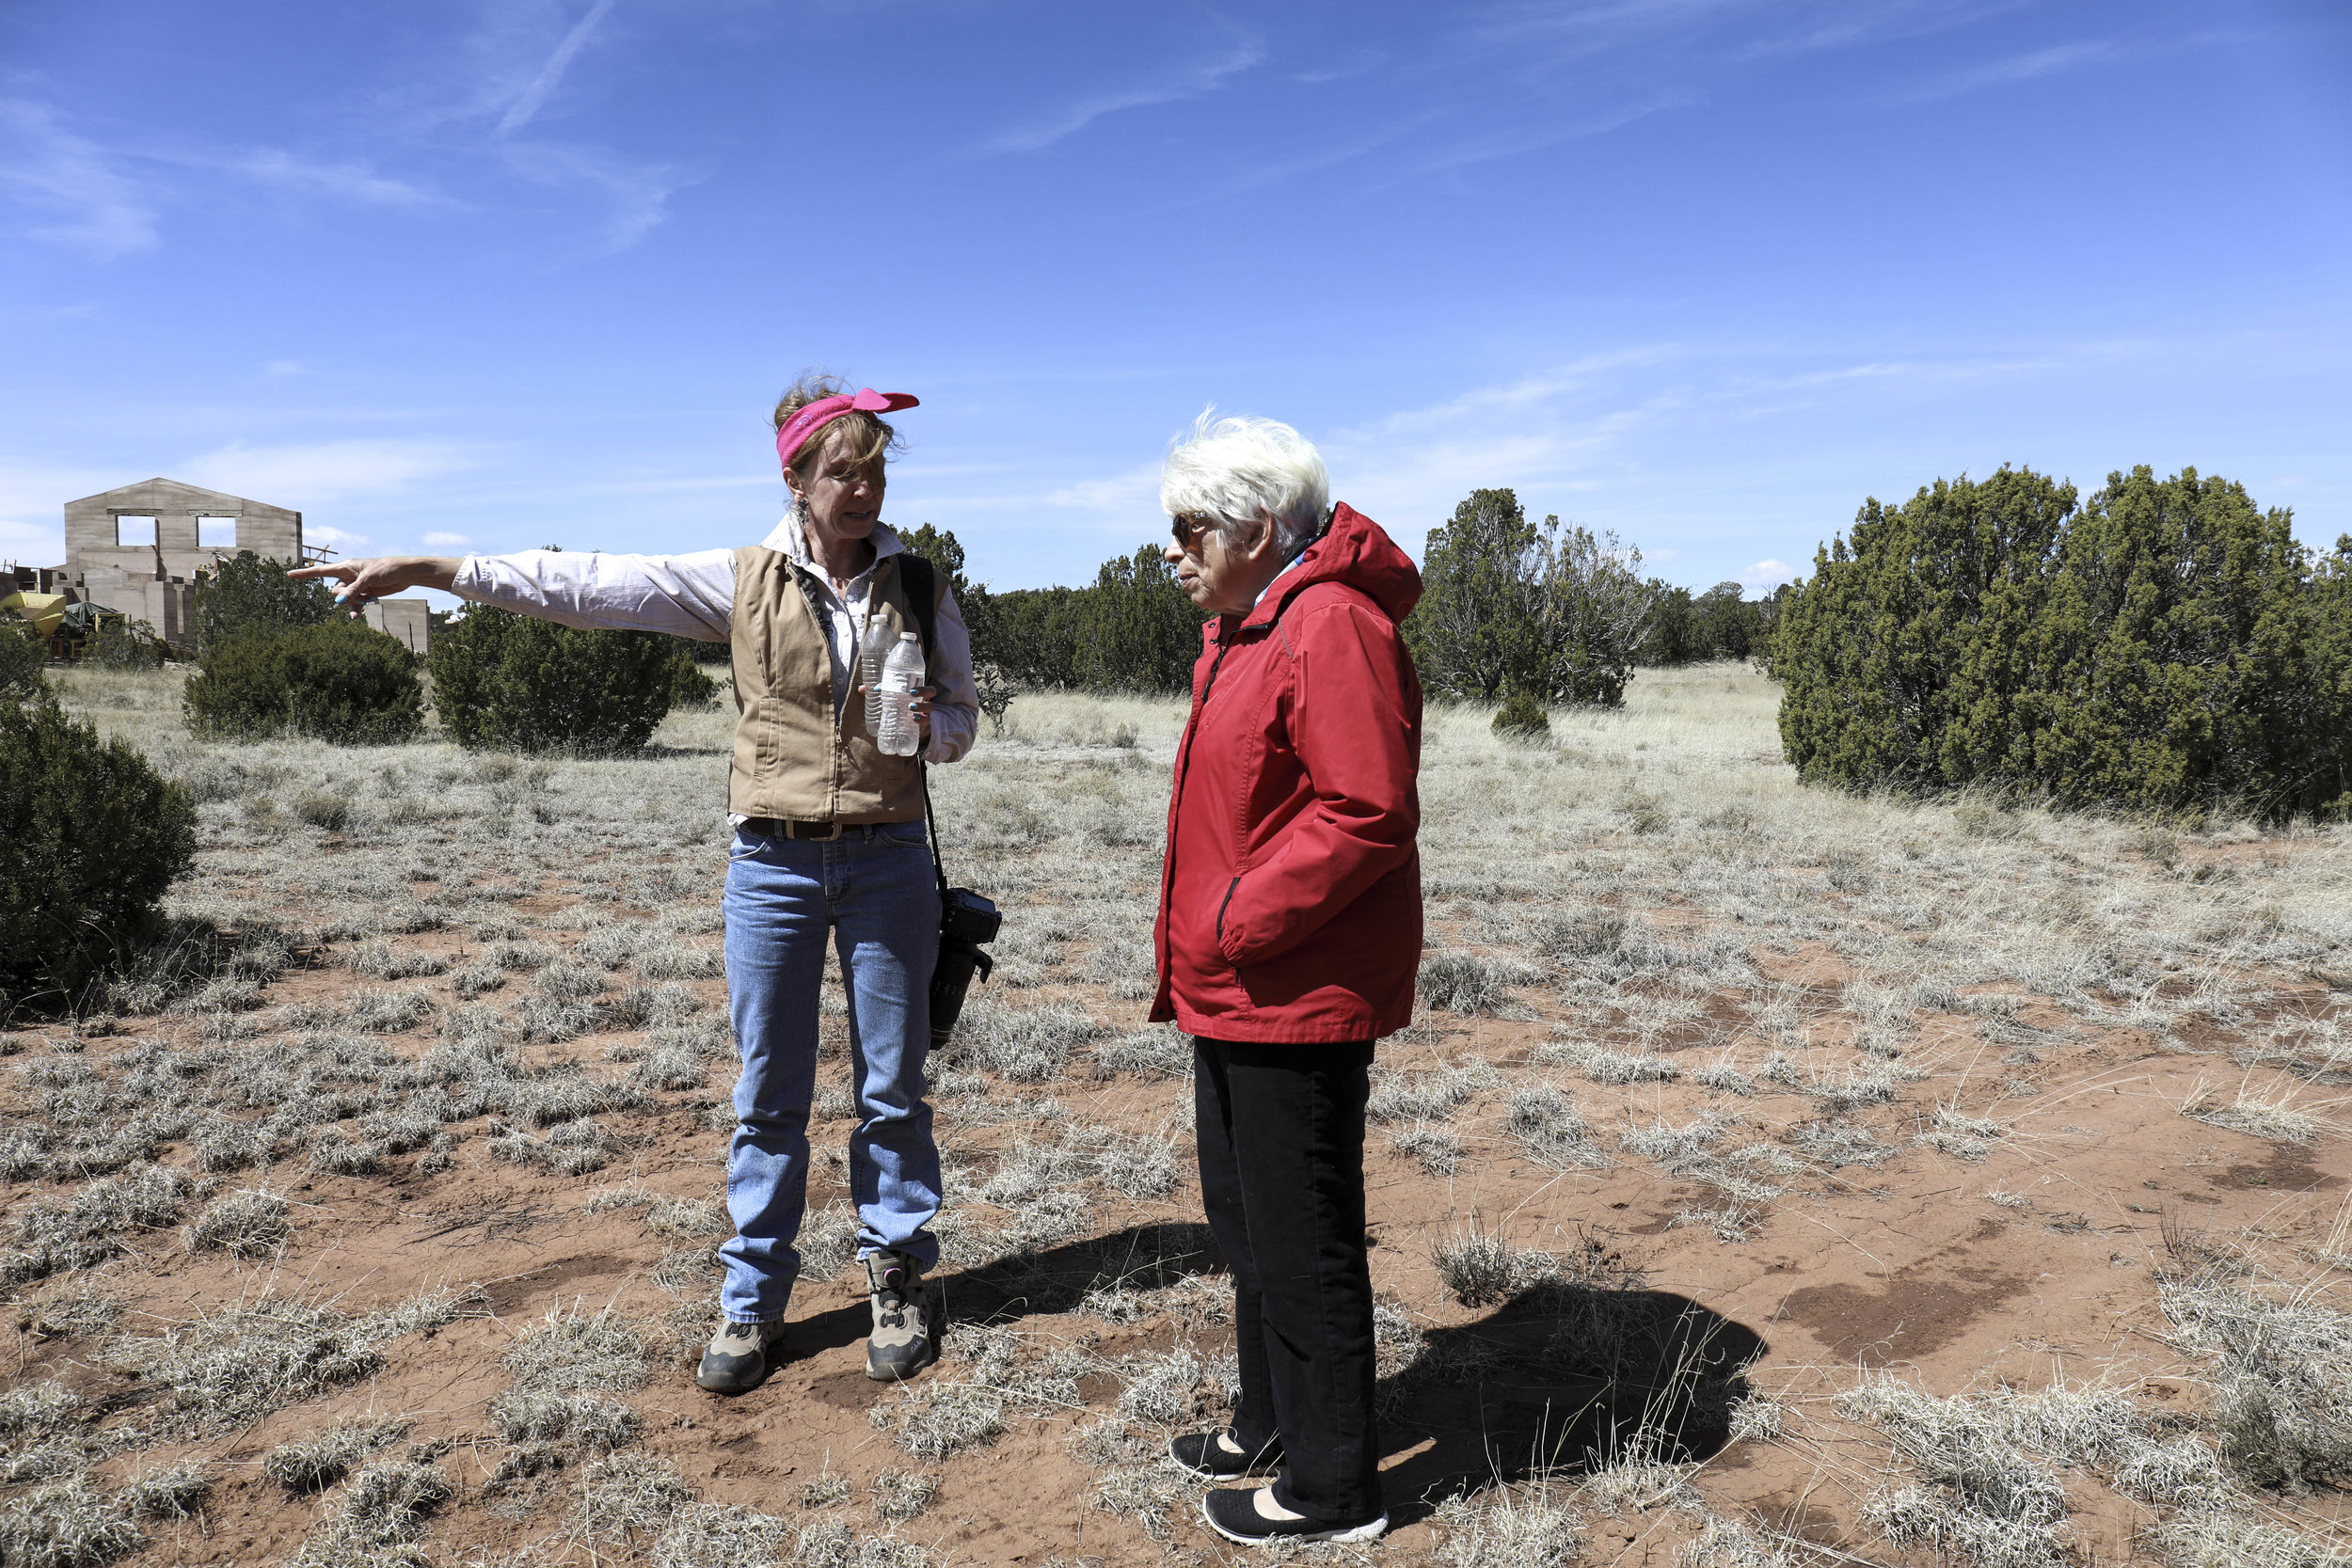  Johnson visits the private property of Kimberly deCastro a native New Mexican and accomplished business women who sought to adopt ten horses from Placitas Wild. The horses would be free roaming on 160 acres with caretakers on the property including 